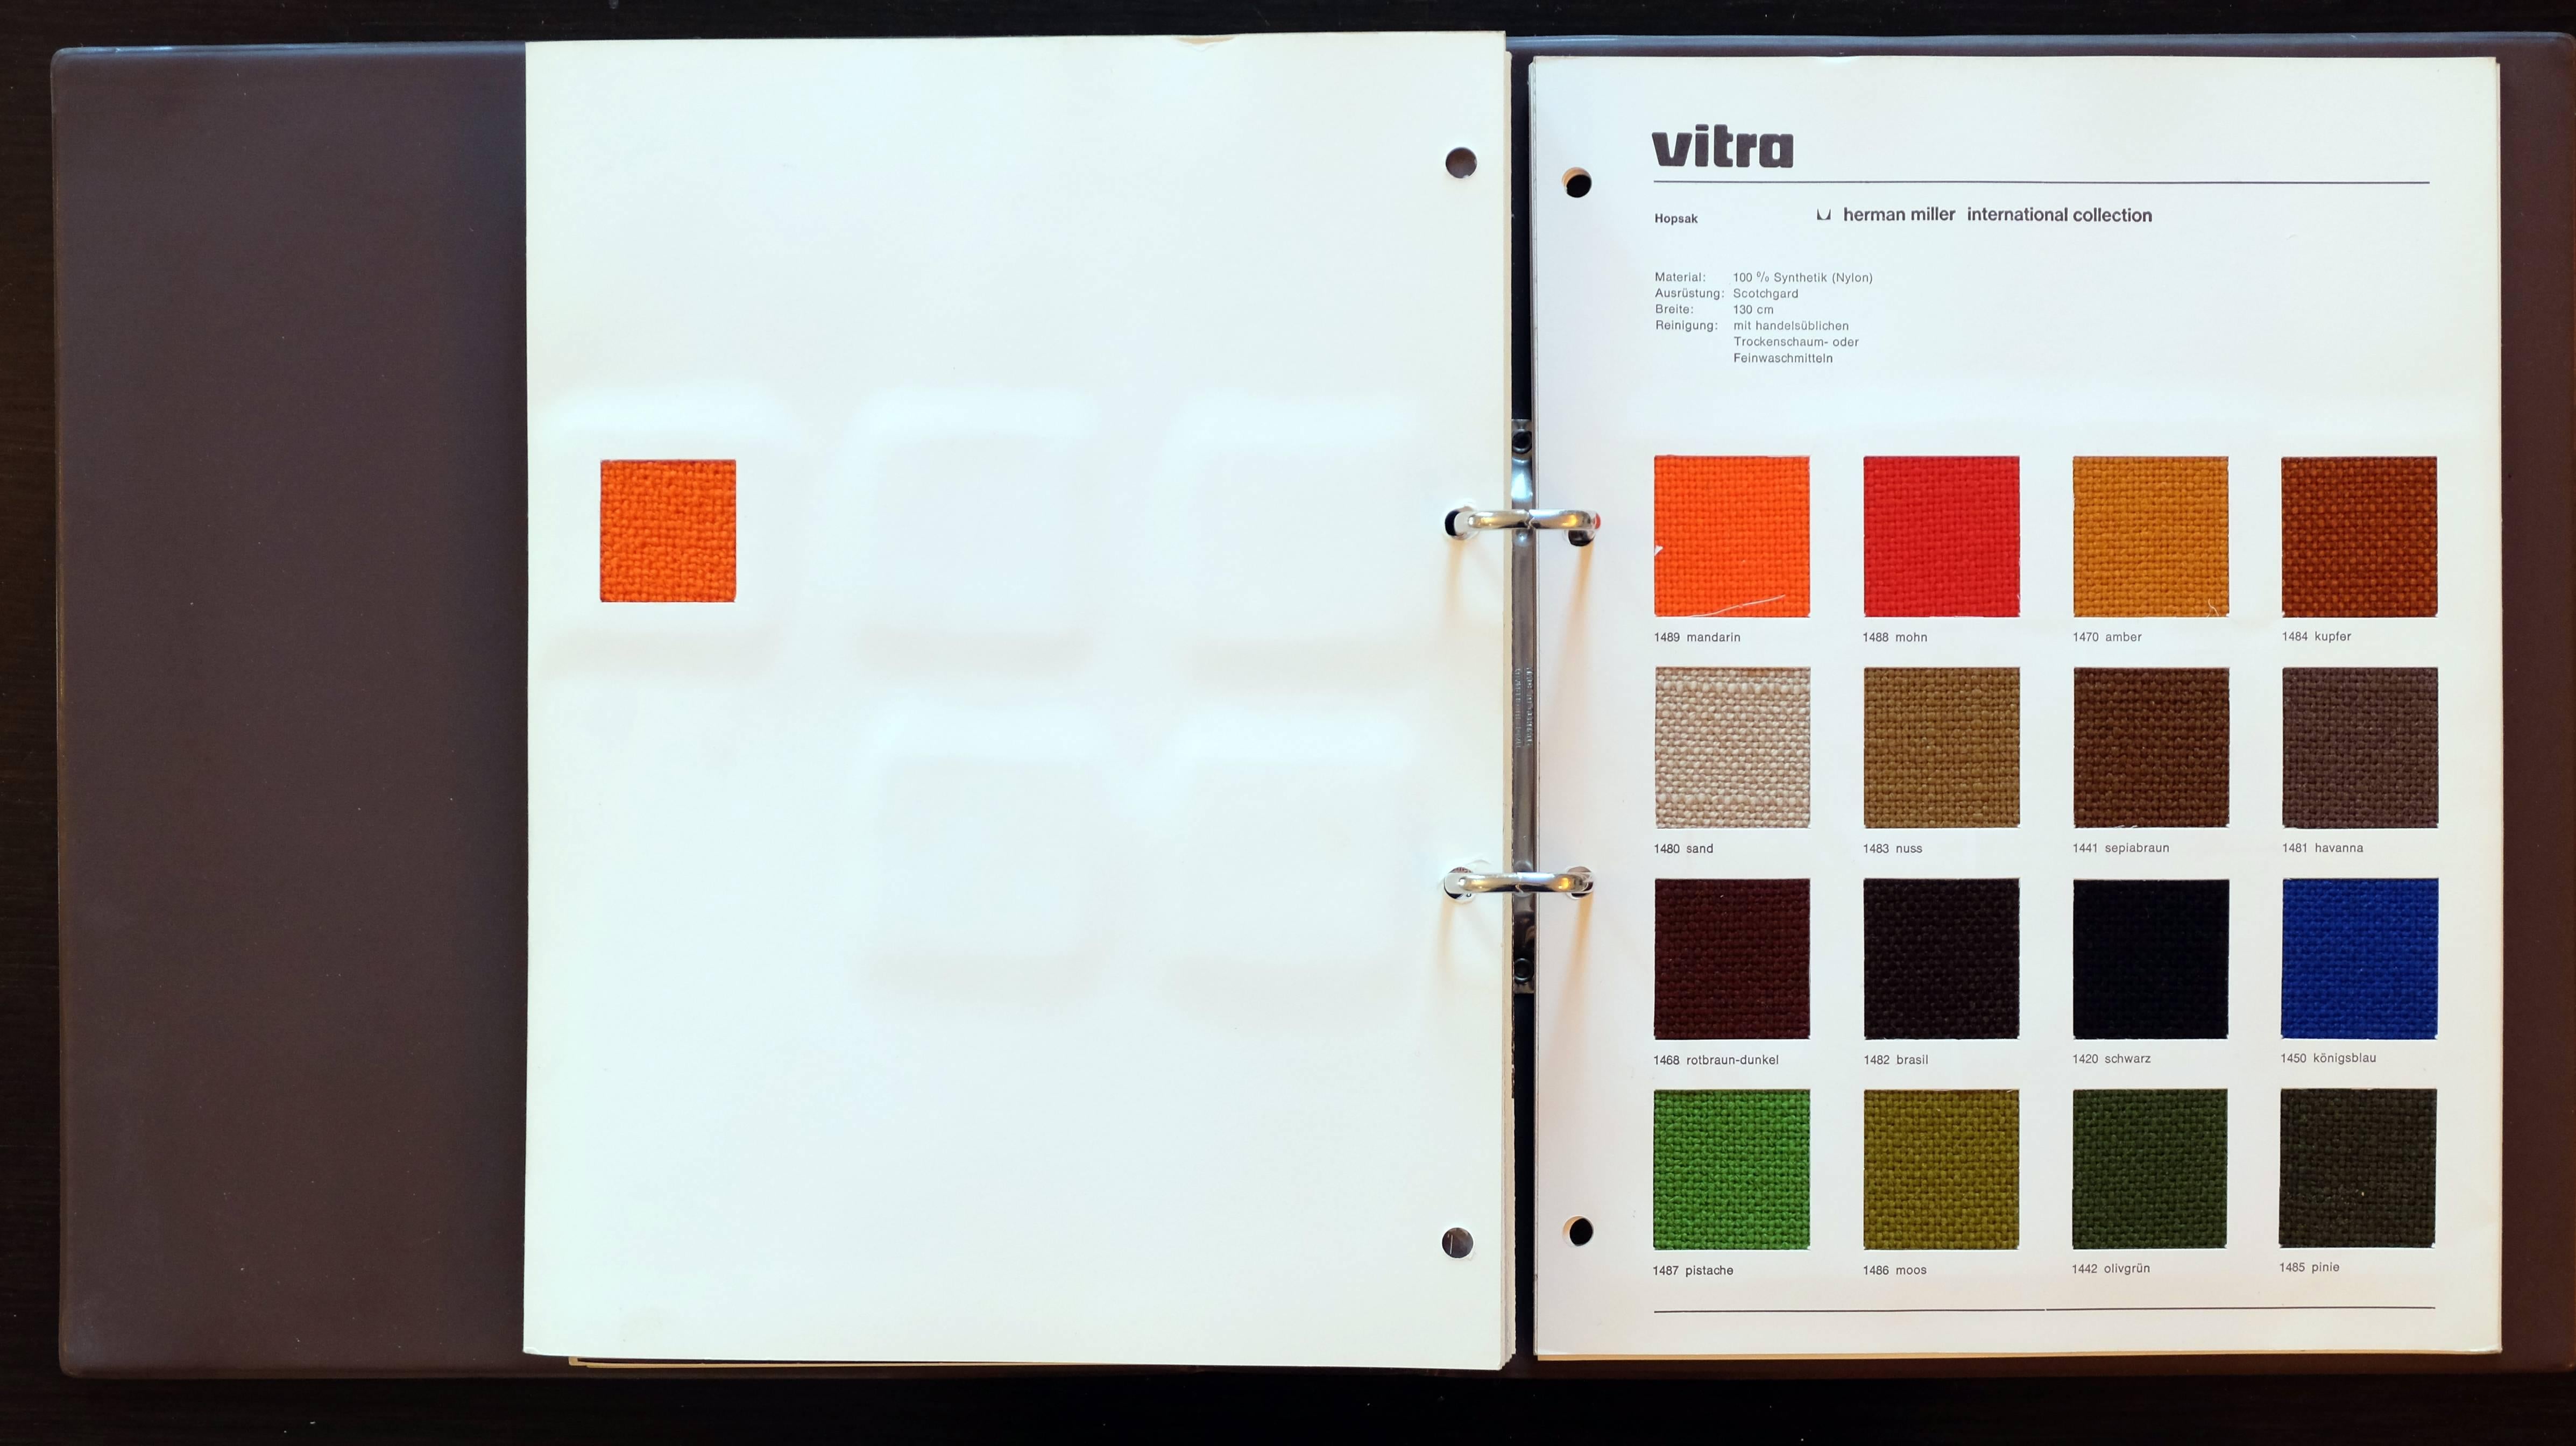 Herman Miller International Collection and Vitra, 1978 Dealer's Catalogue 3